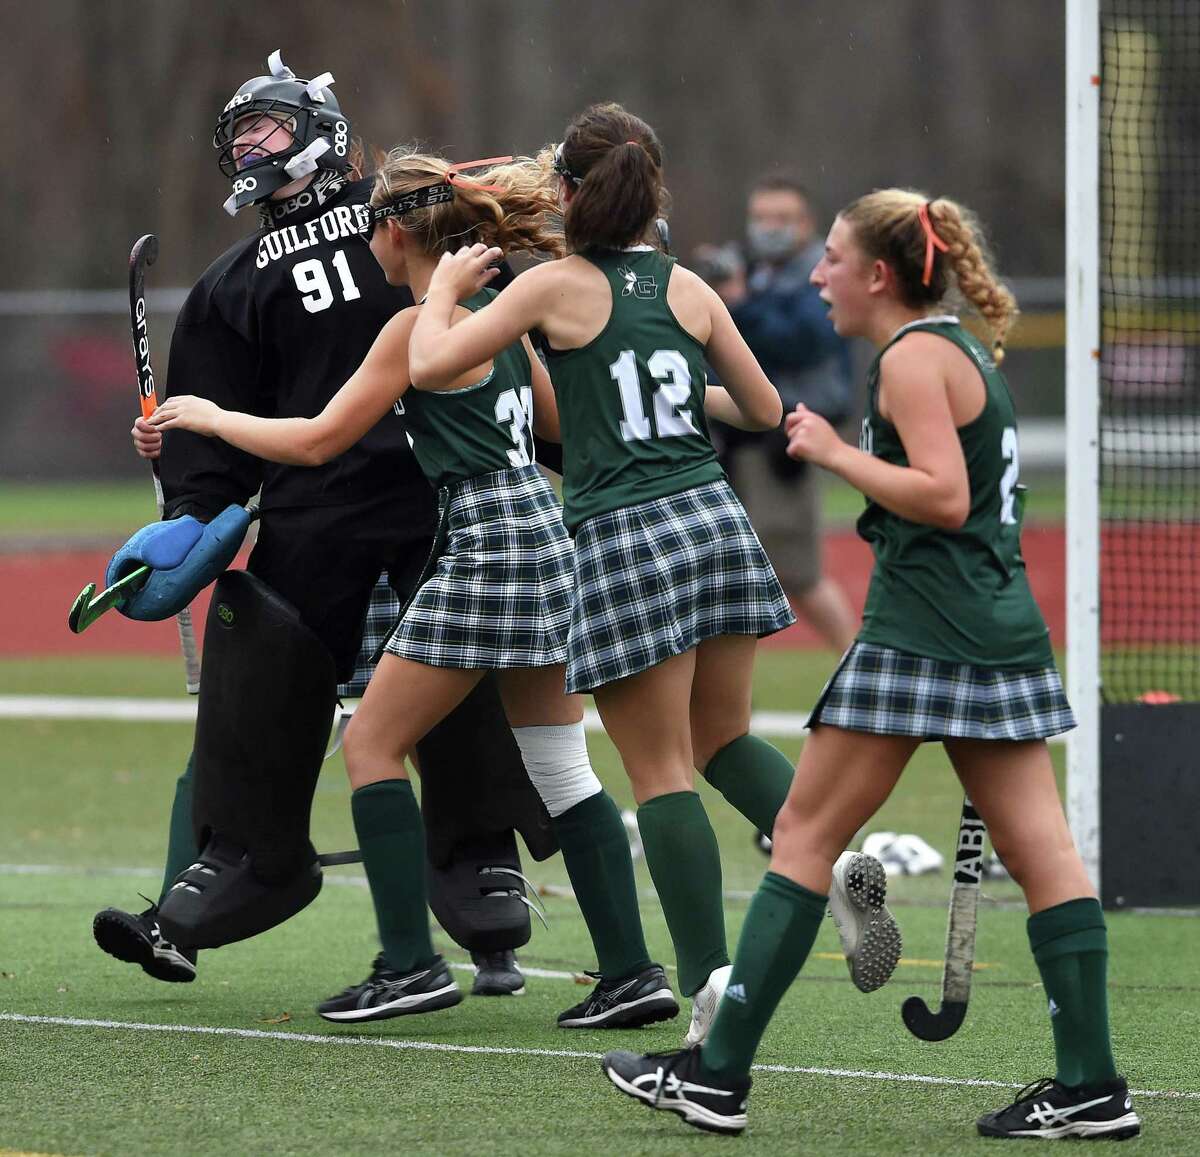 Guilford goalkeeper Eve Young, left, celebrates with teammates after its 5-1 win over Cheshire in the SCC Division A field hockey championship at Cheshire High on Wednesday.